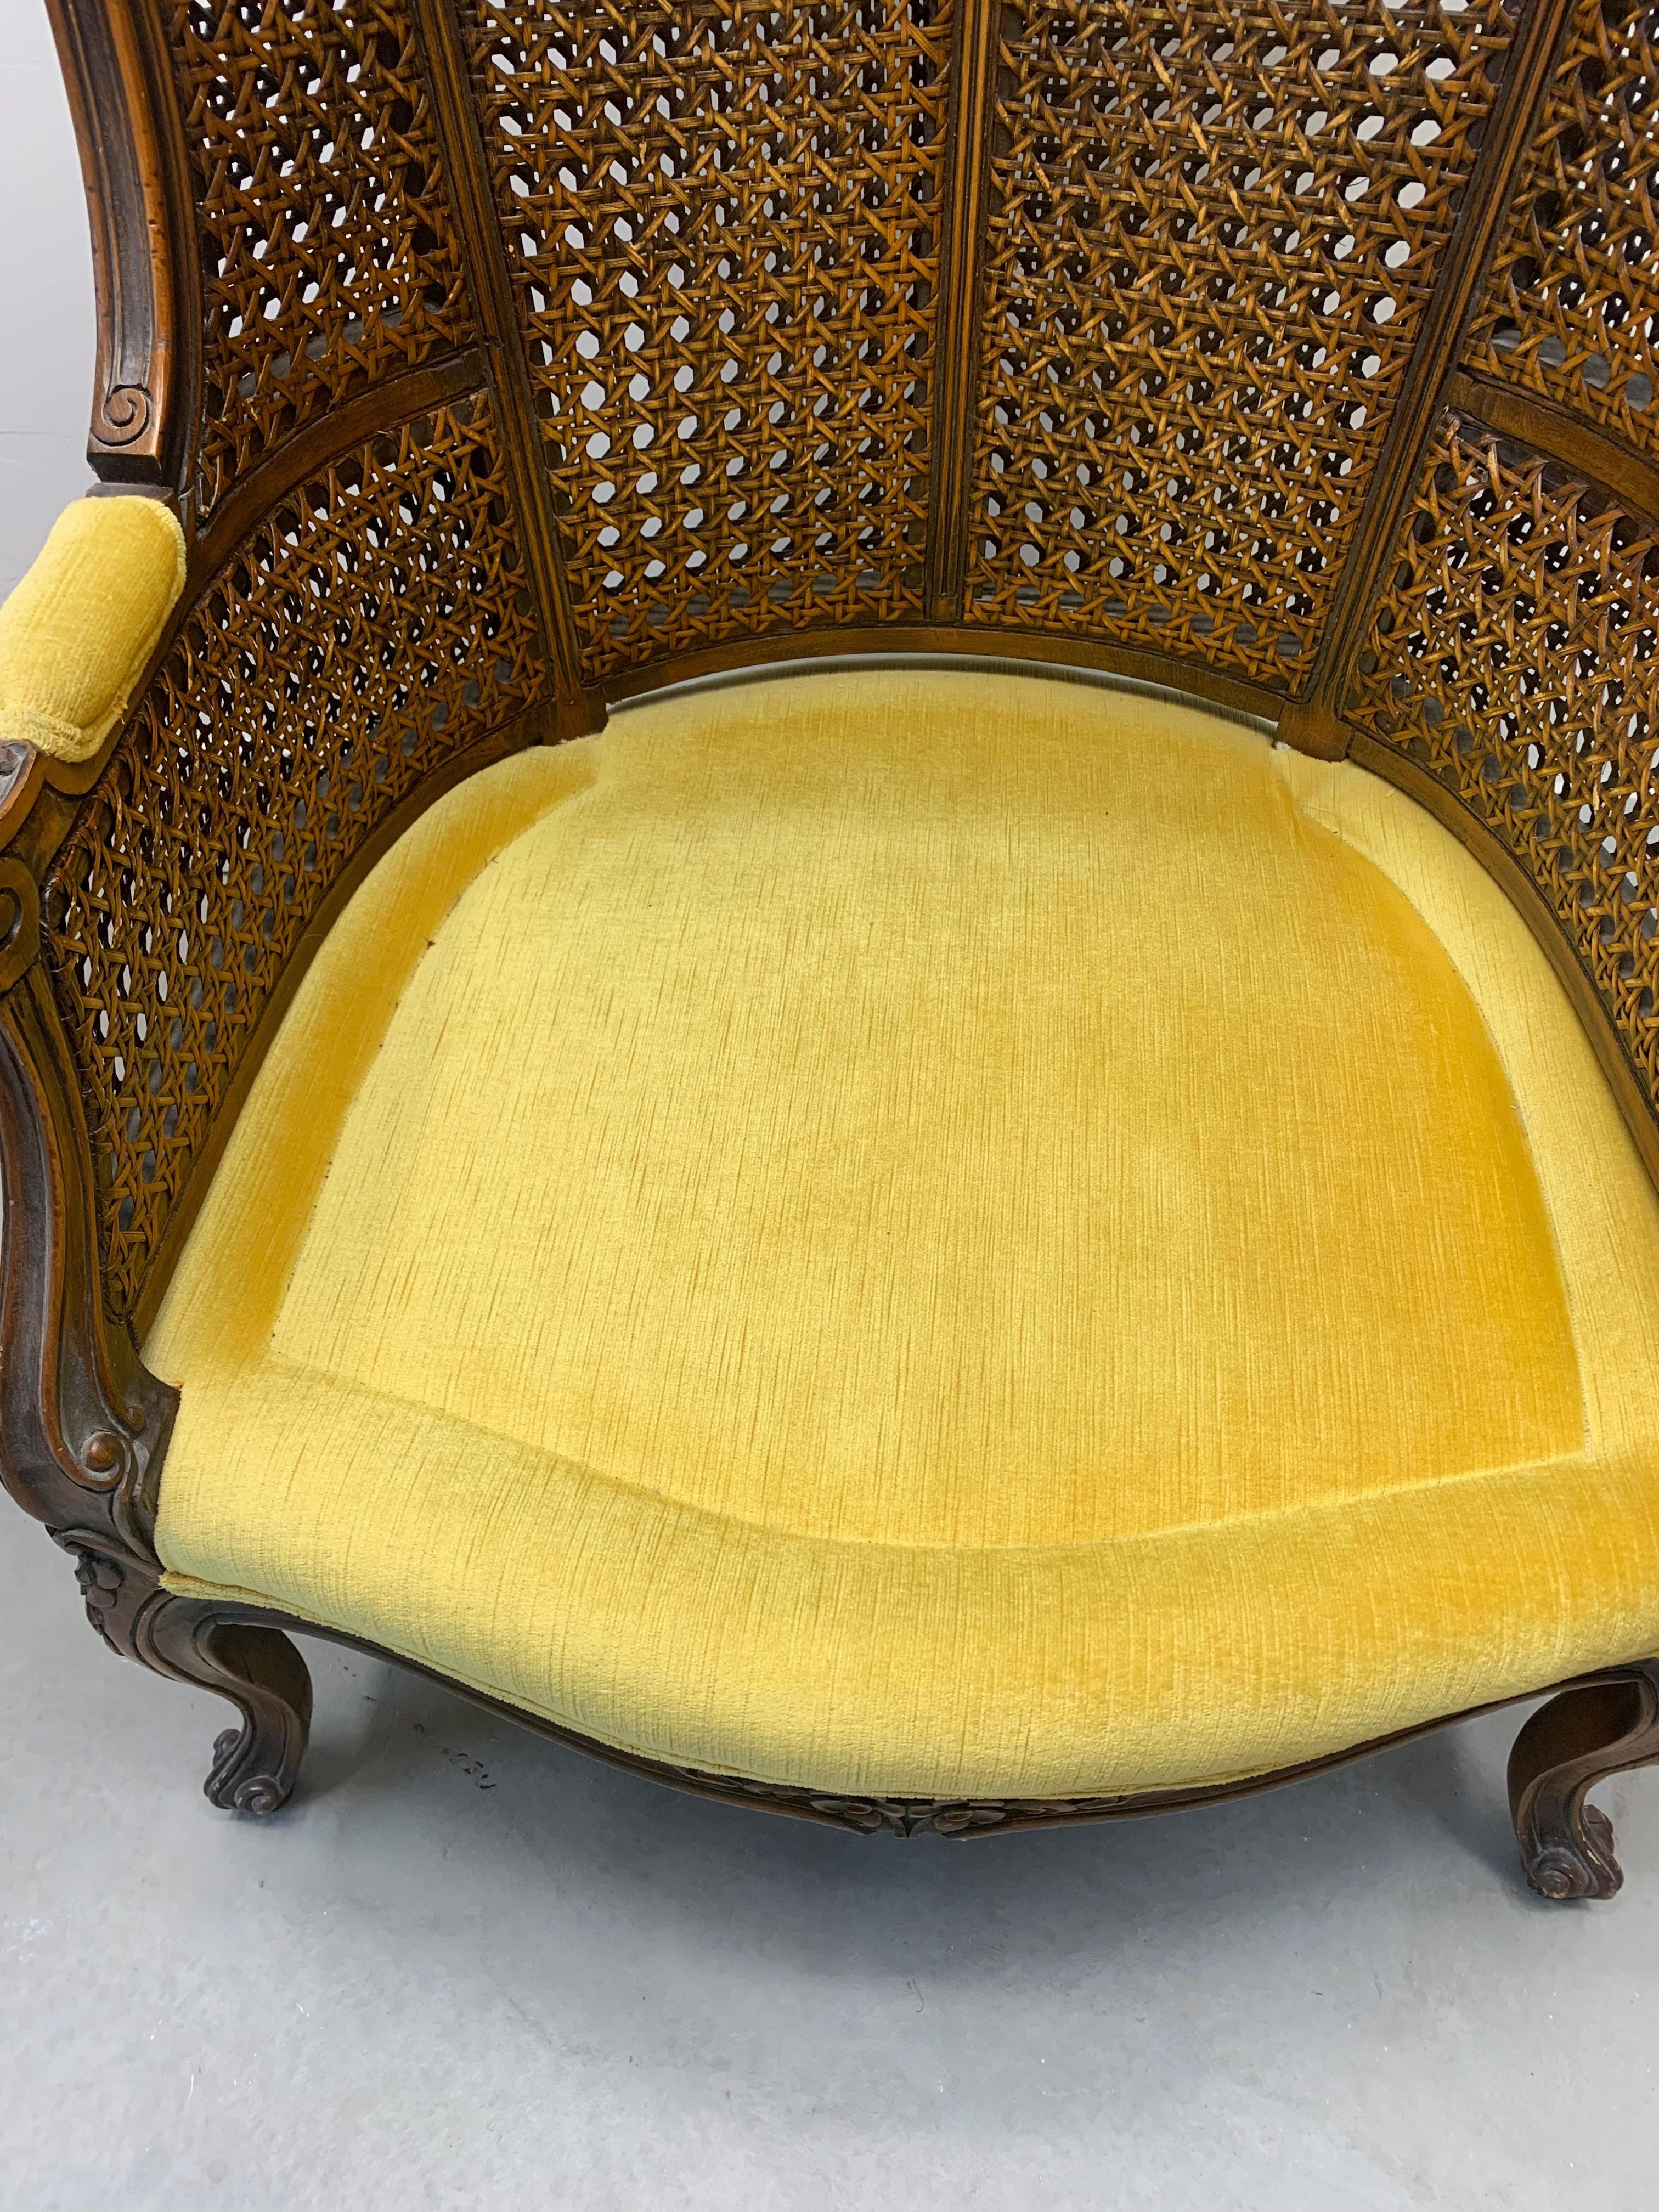 Vintage French Country Louis XV Style Double Cane Italian Canopy Porter Chair  In Good Condition For Sale In Draper, UT